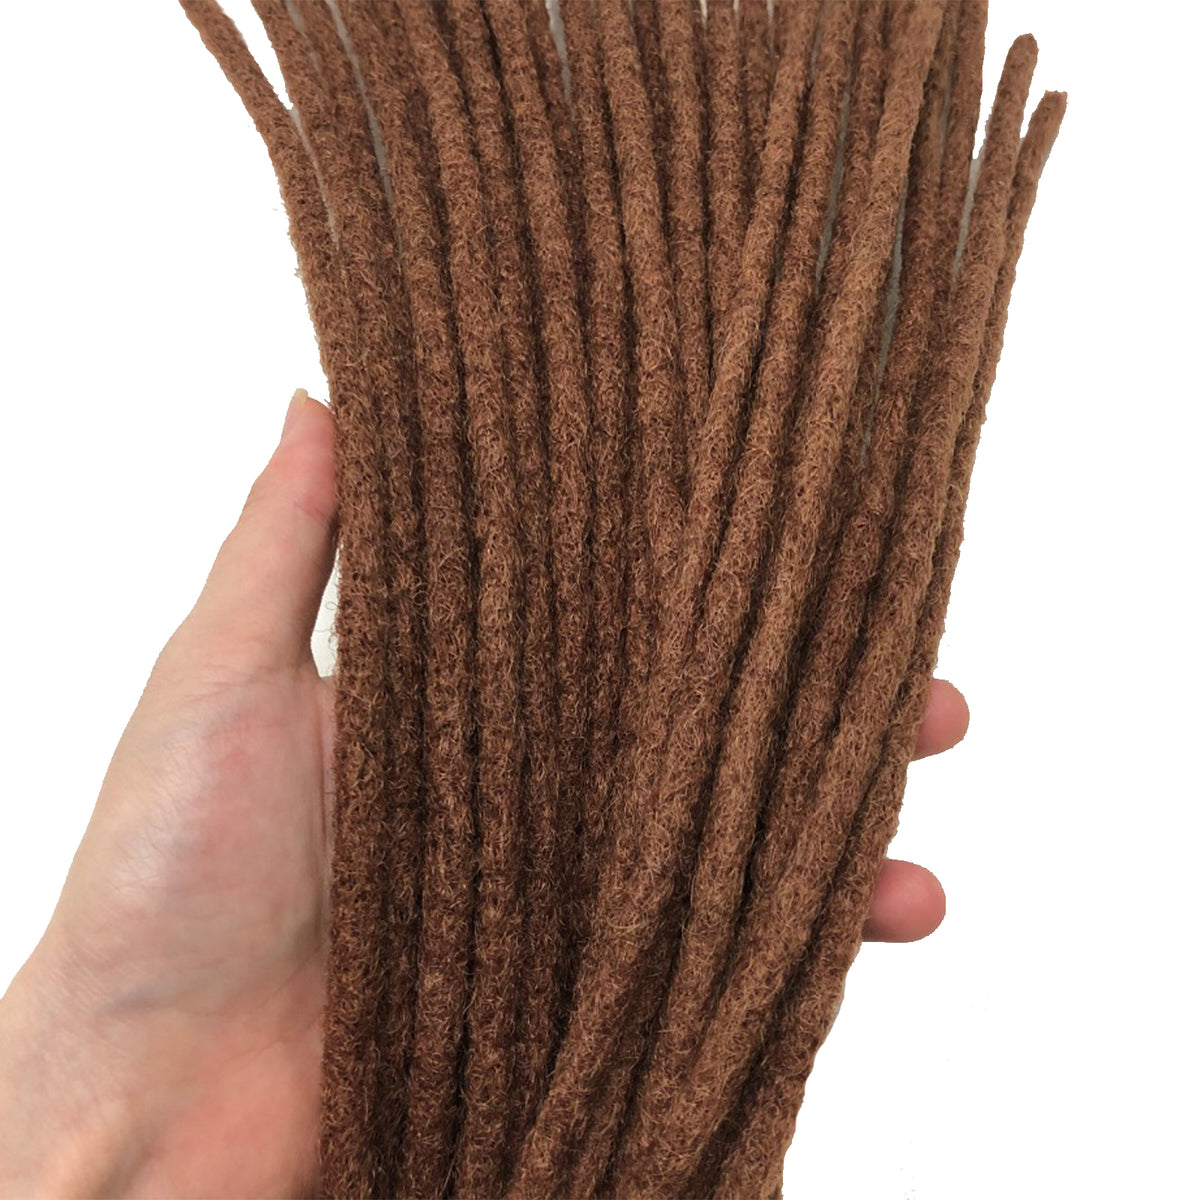 100% Human Hair Dreadlock Extensions 16Inch 10 Strands Handmade Natural Loc Extensions Human Hair Bundle Dreads Extensions For Woman & Men Can Be Dyed/Bleached (Brown/33, 16inch length 0.6 cm Width)